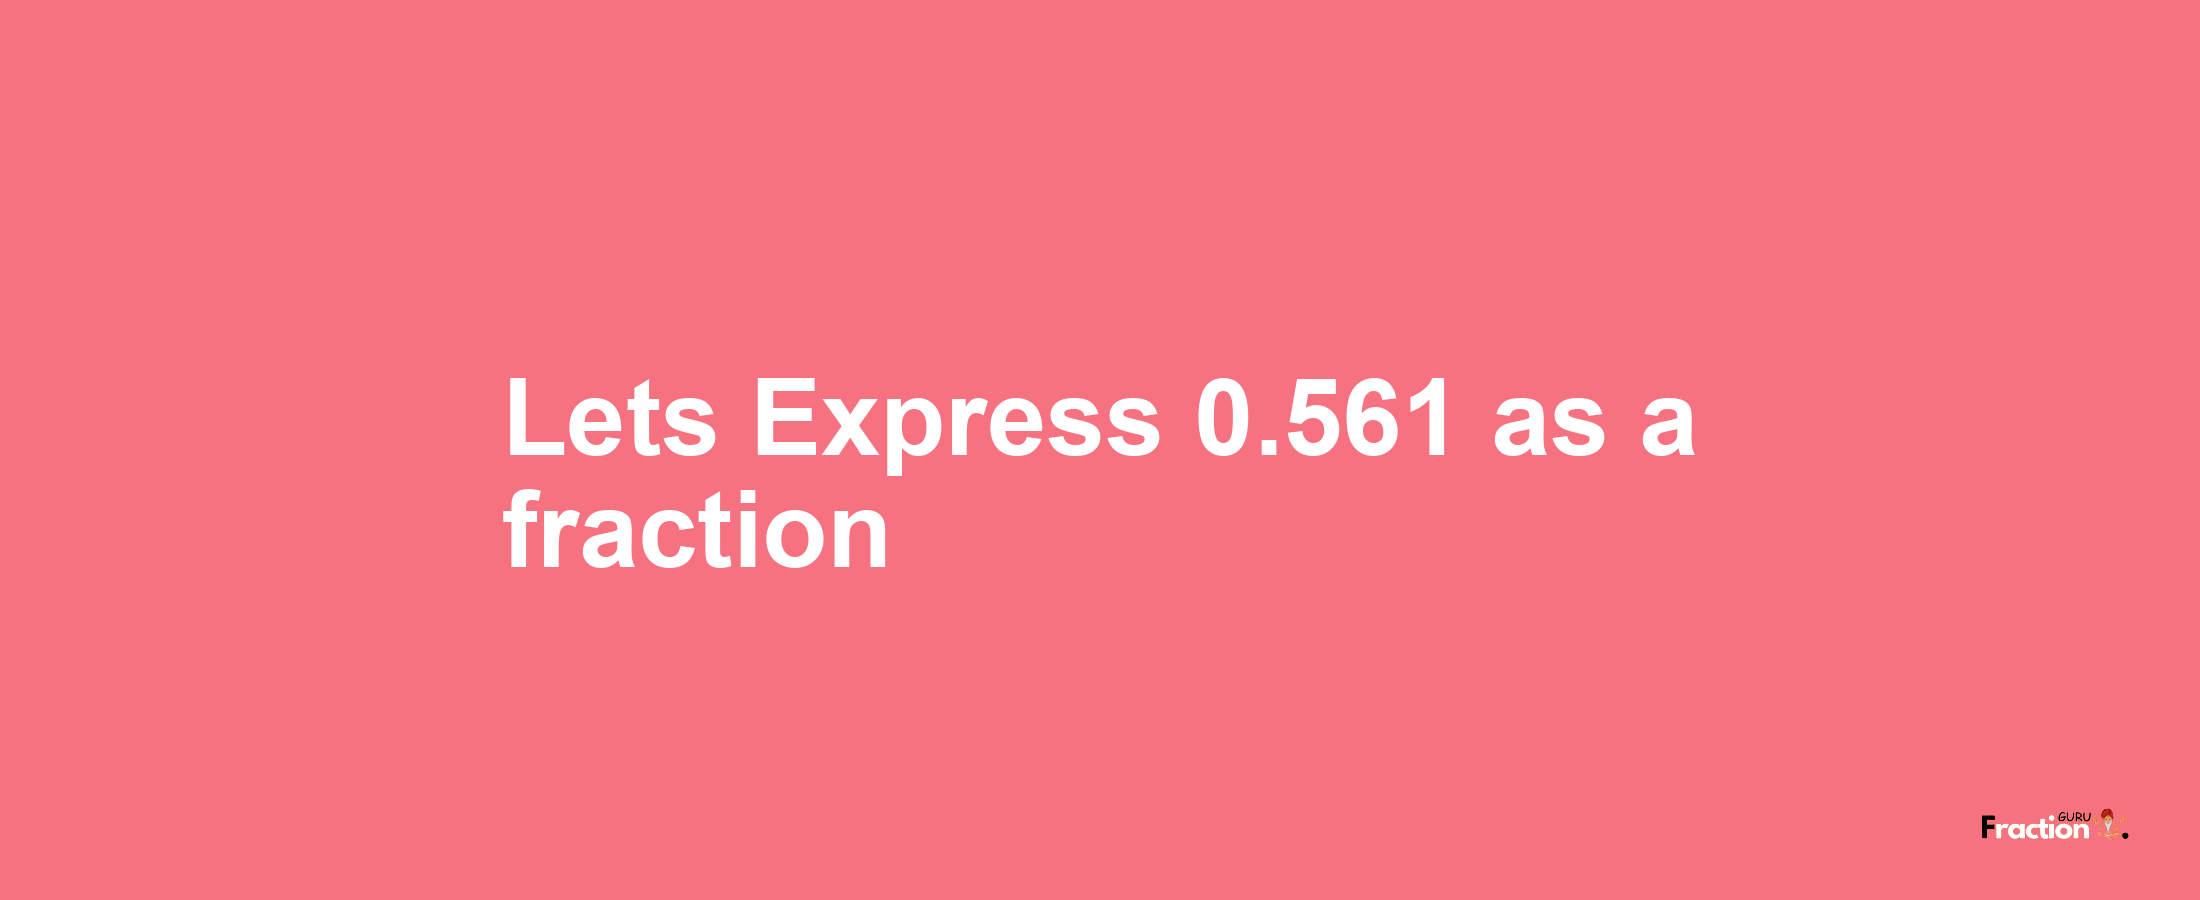 Lets Express 0.561 as afraction